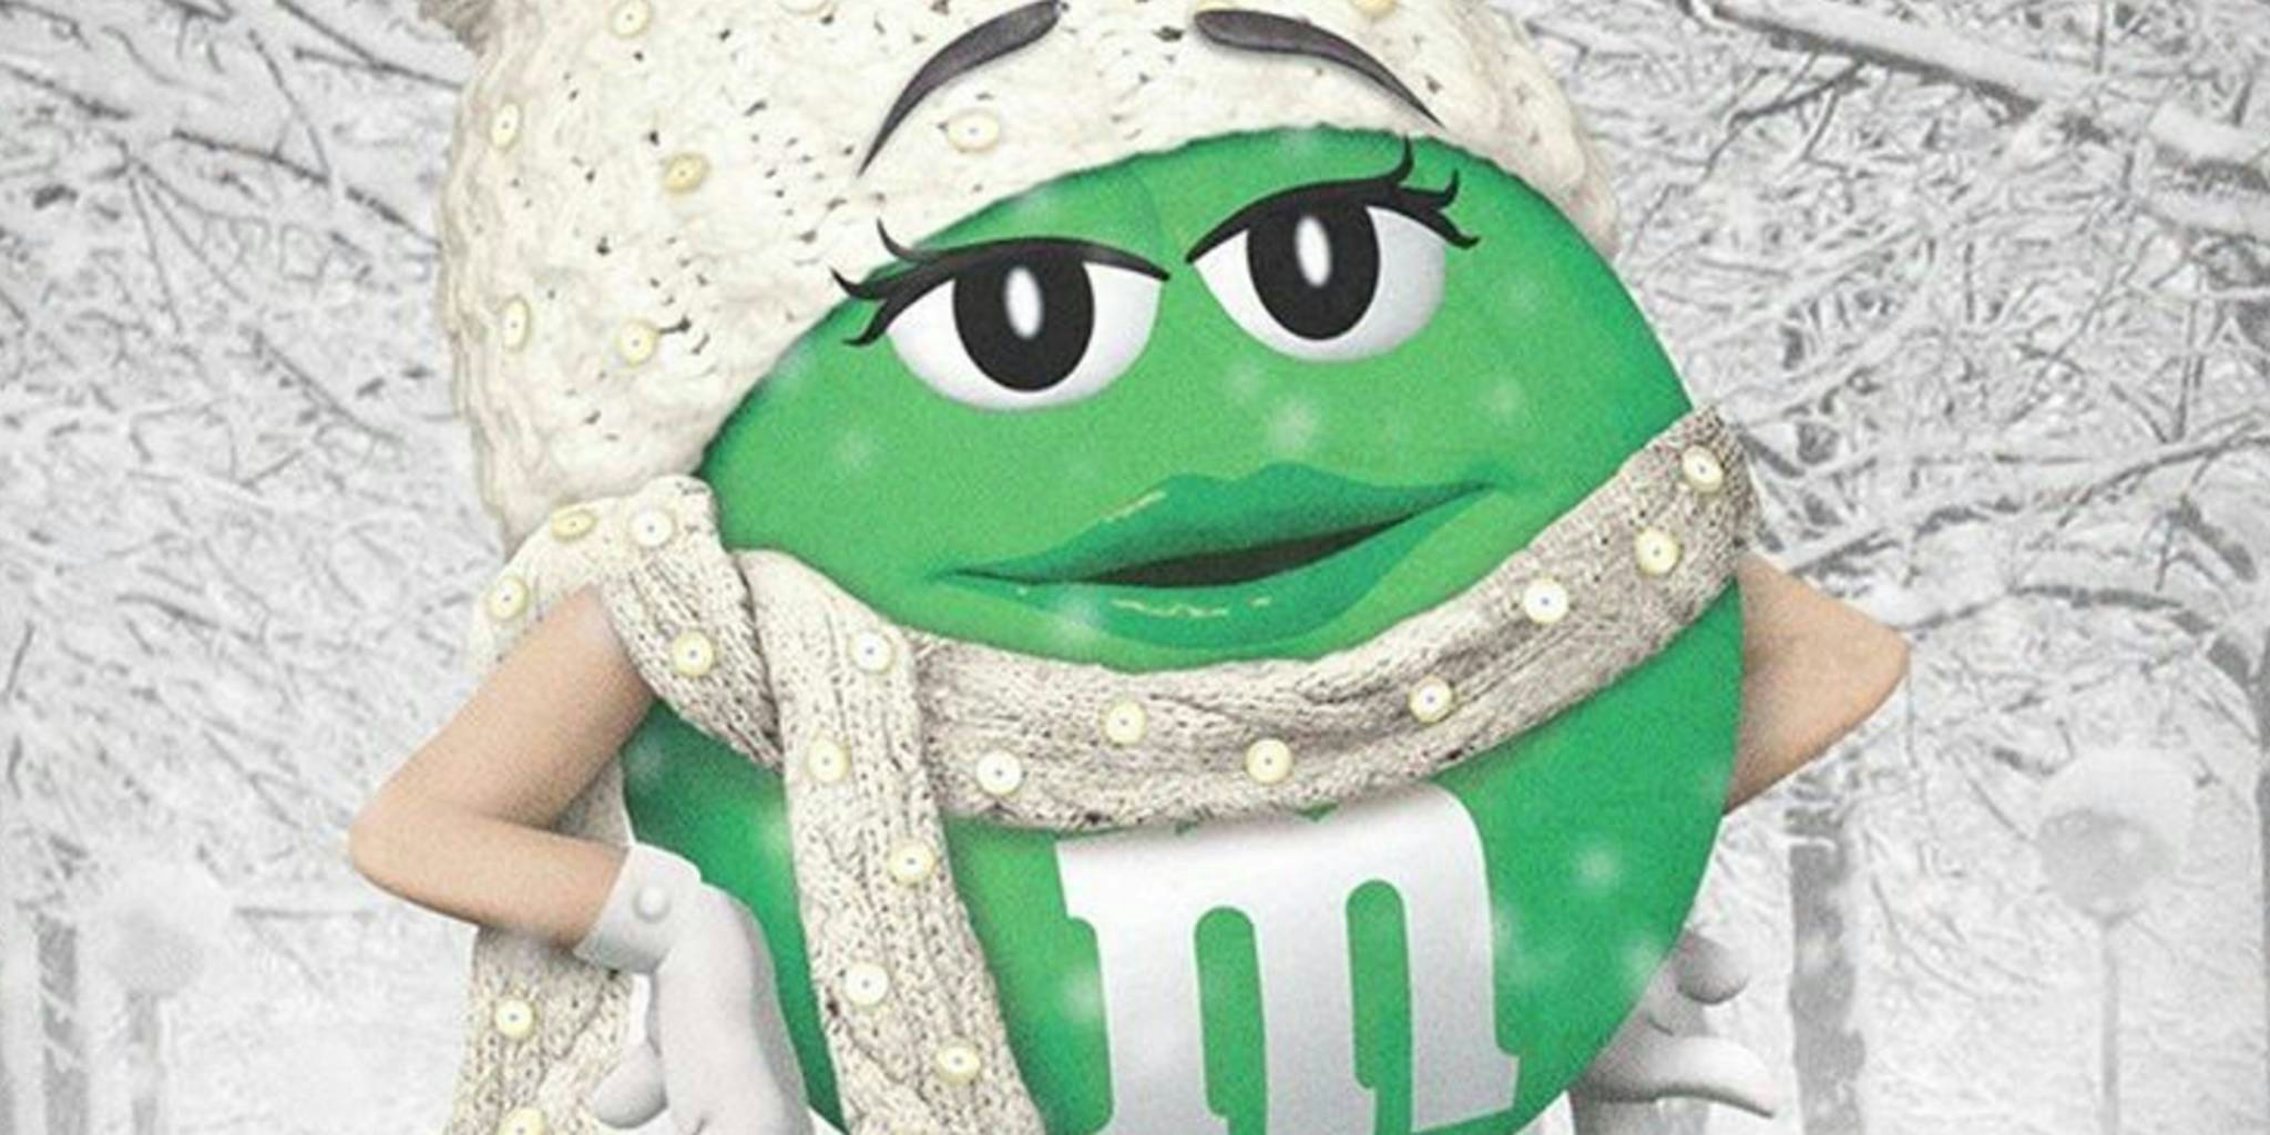 Everybody Wants to Have Sex With the Green M&M